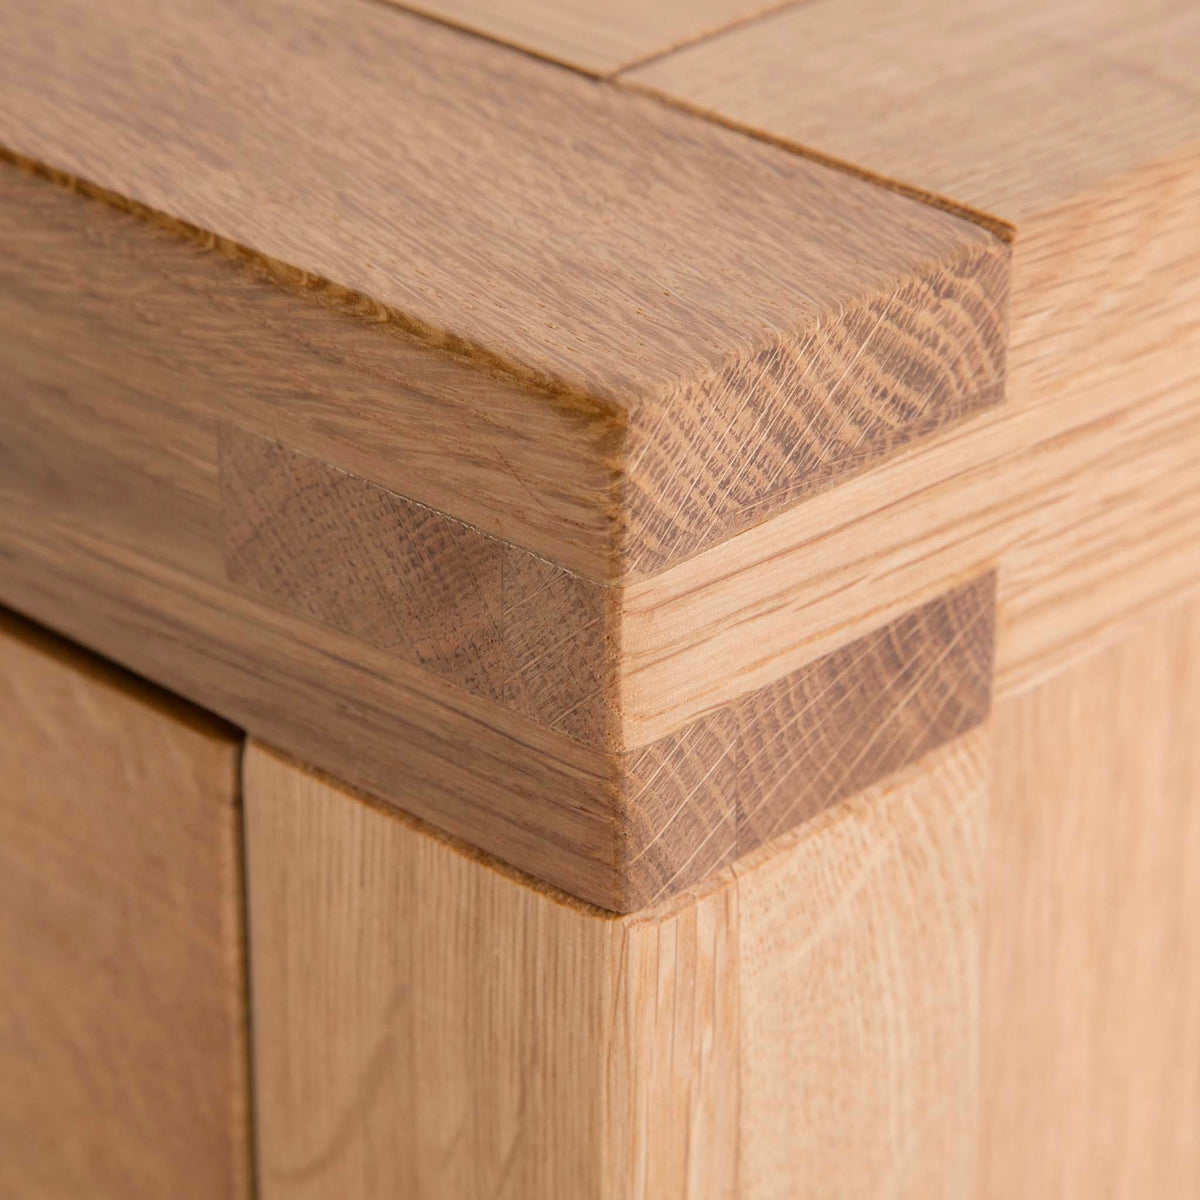  Abbey Light Oak Small Sideboard Cabinet  - Close up of top corner tenon joint